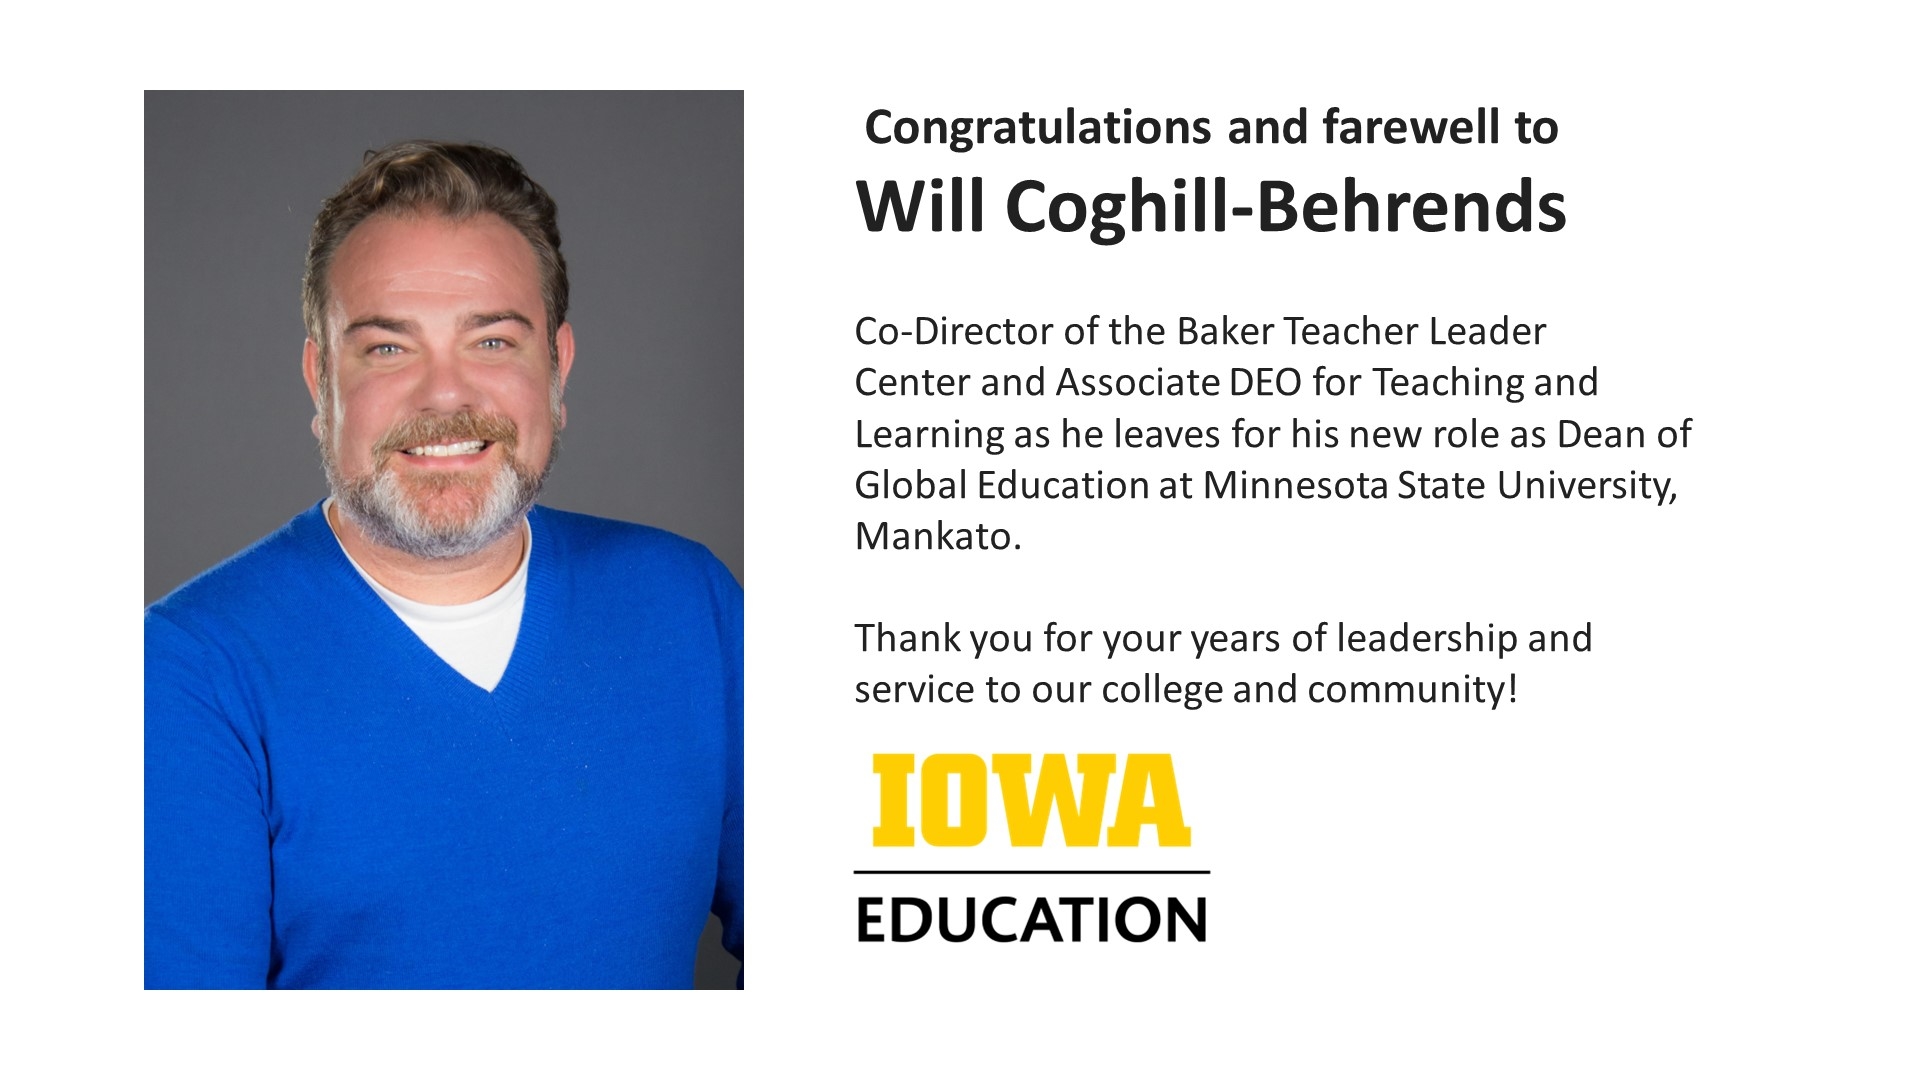  Congratulations and farewell to Will Coghill-Behrends   Co-Director of the Baker Teacher Leader Center and Associate DEO for Teaching and Learning as he leaves for his new role as Dean of Global Education at Minnesota State University, Mankato.   Thank you for your years of leadership and service to our college and community!